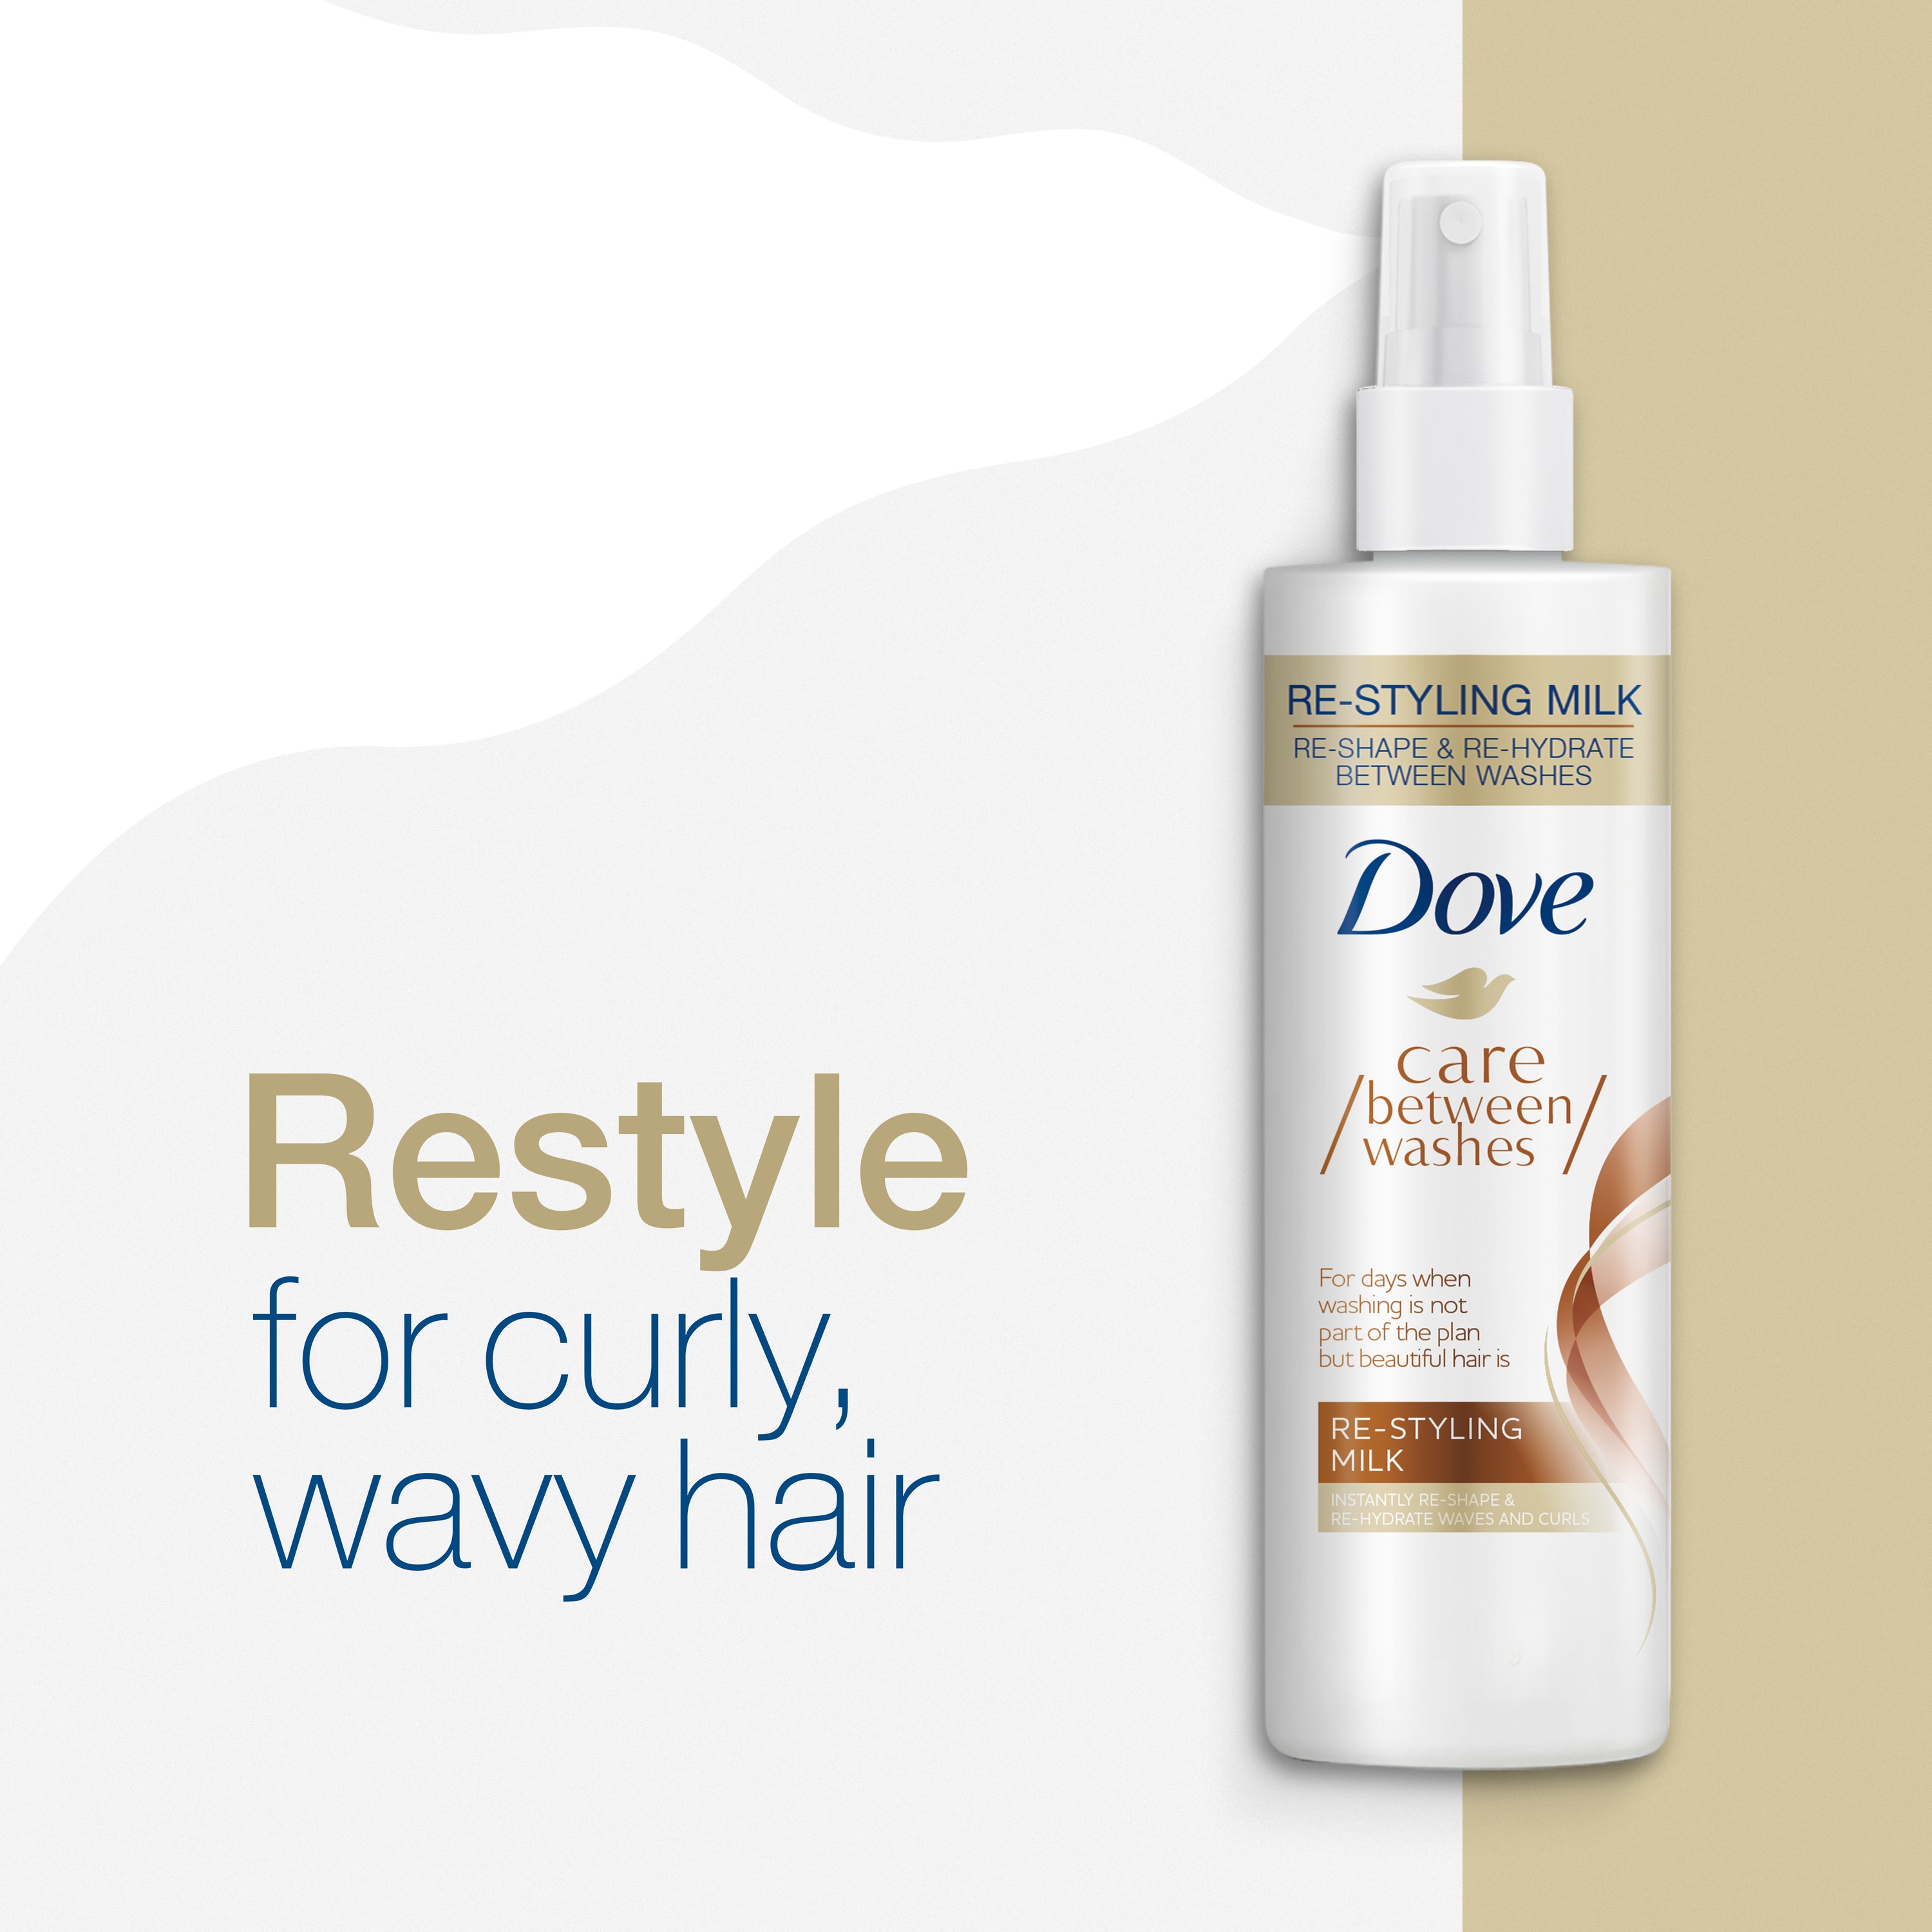 Dove Care Between Washes Restyler Re-Styling Milk 6.8 oz - image 4 of 10